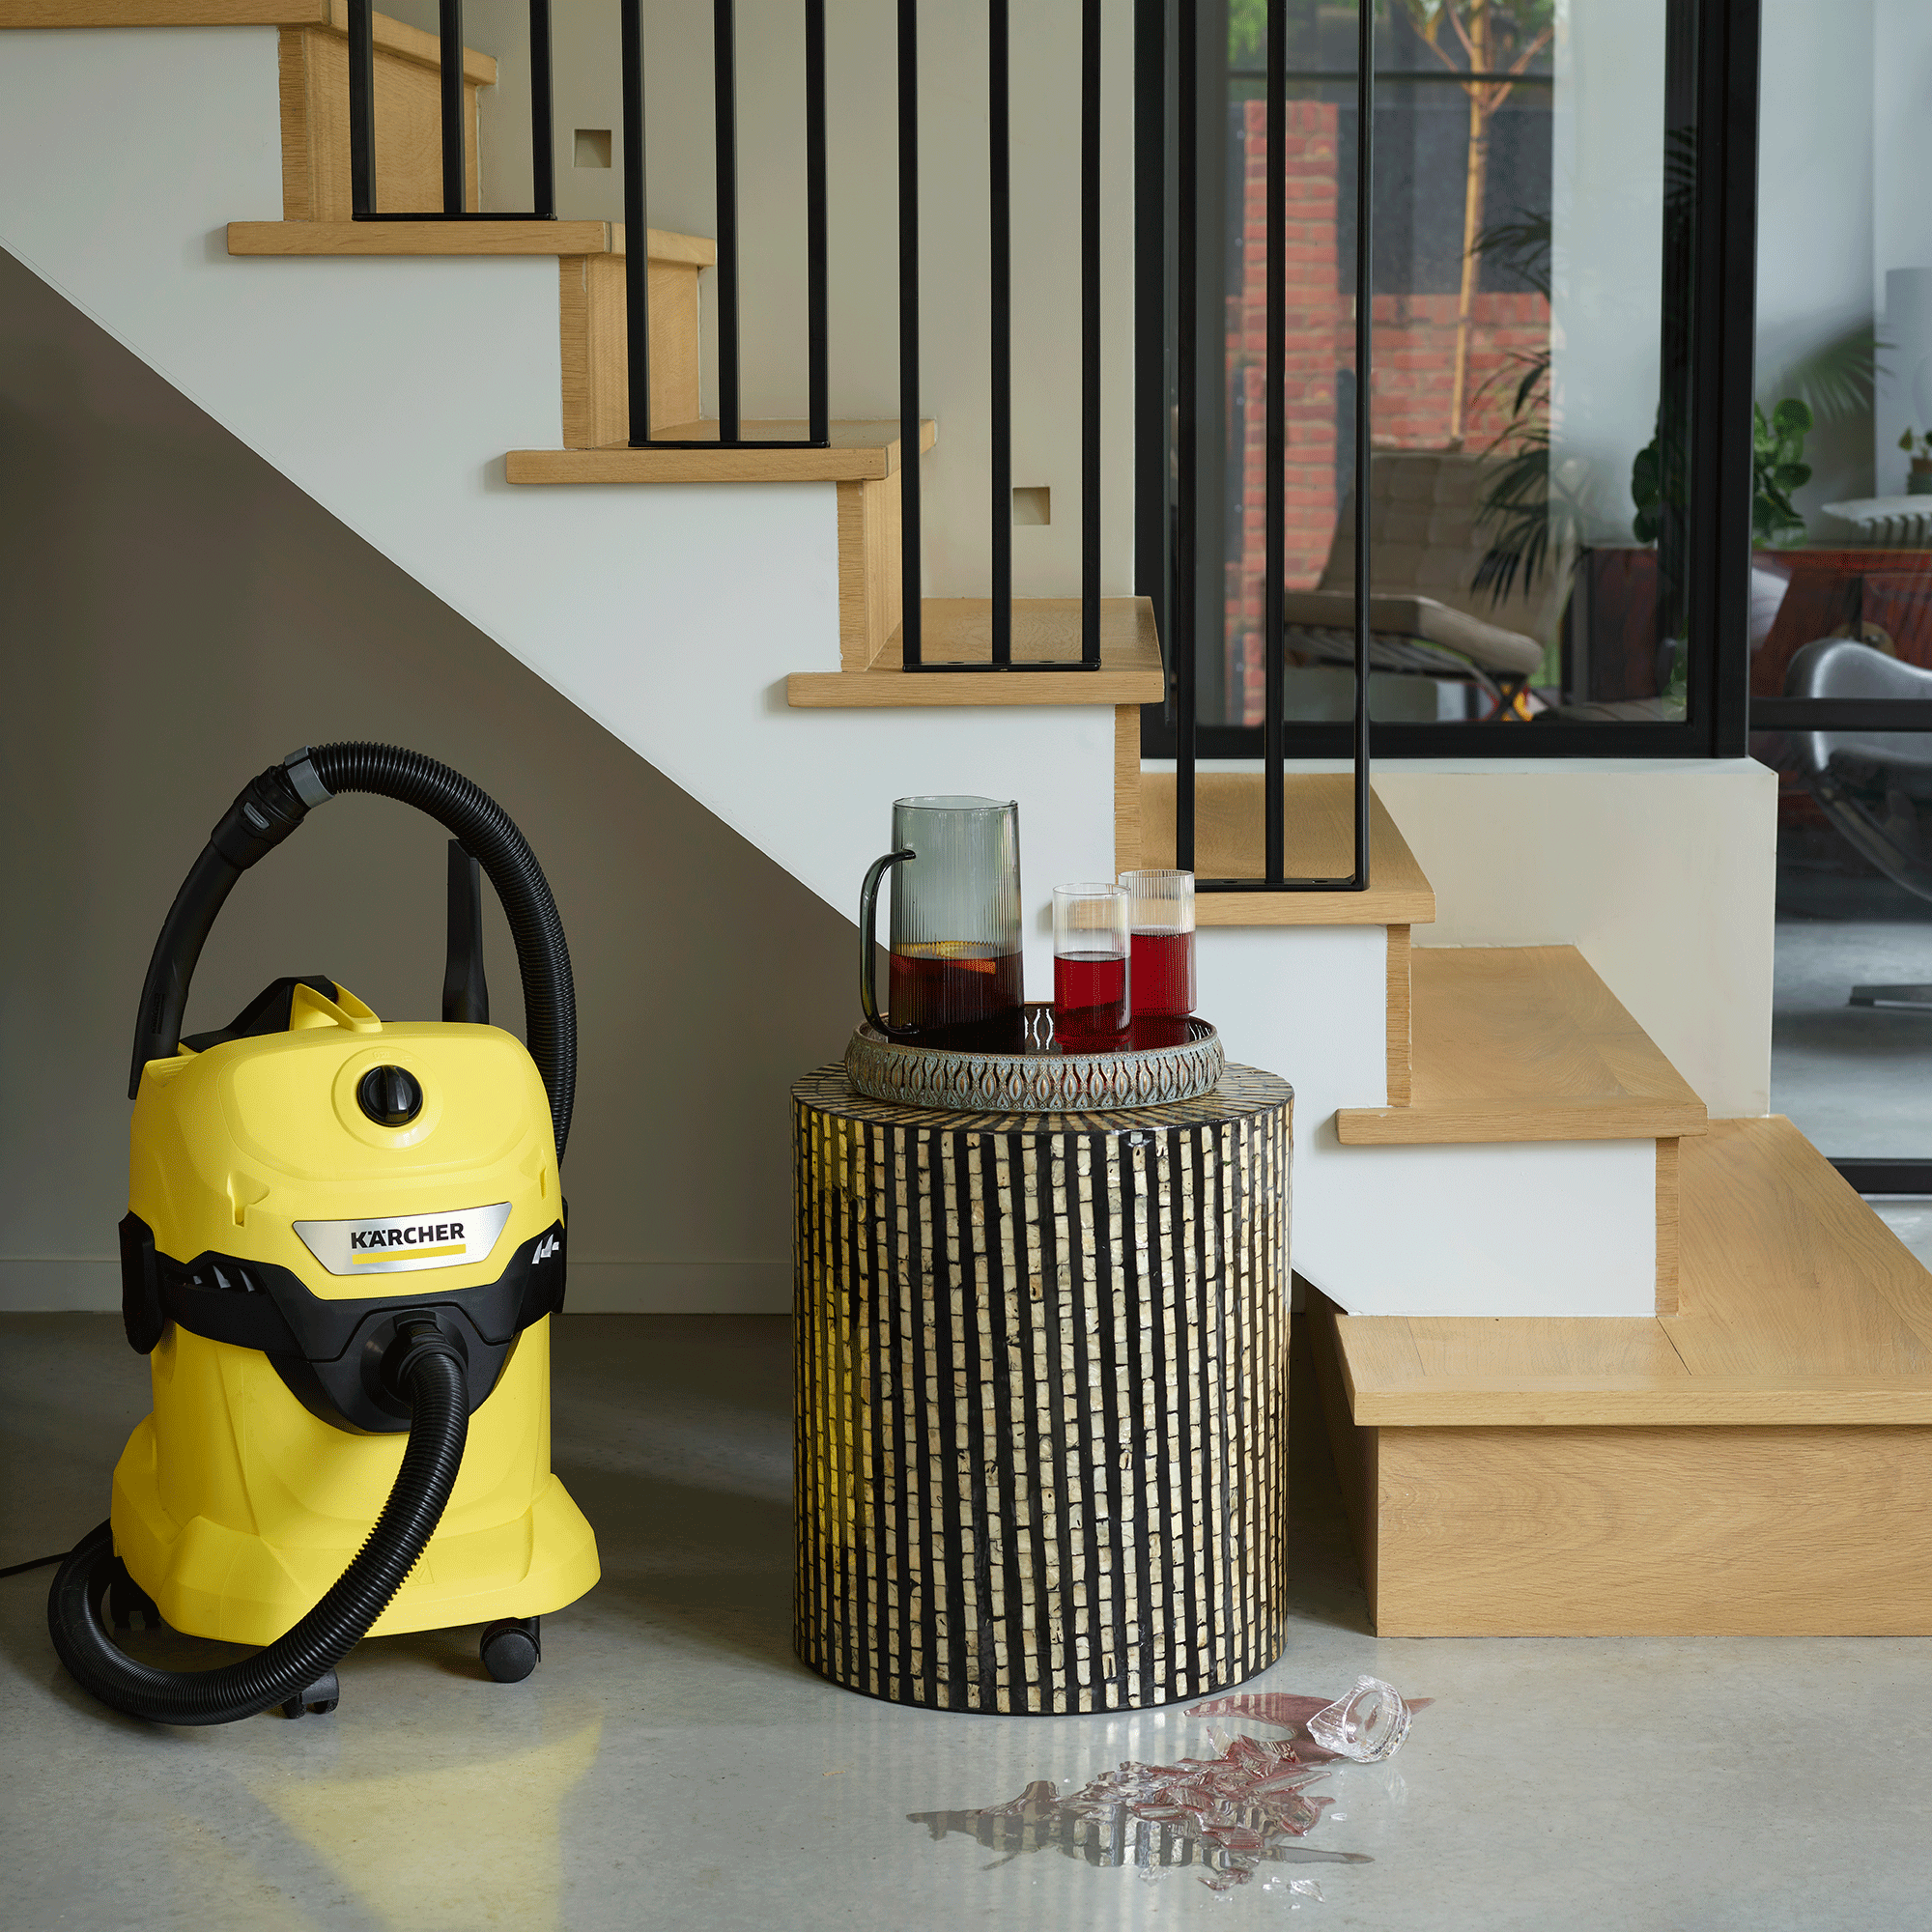 Karcher wet and dry vacuum cleaner in hallway with glasses